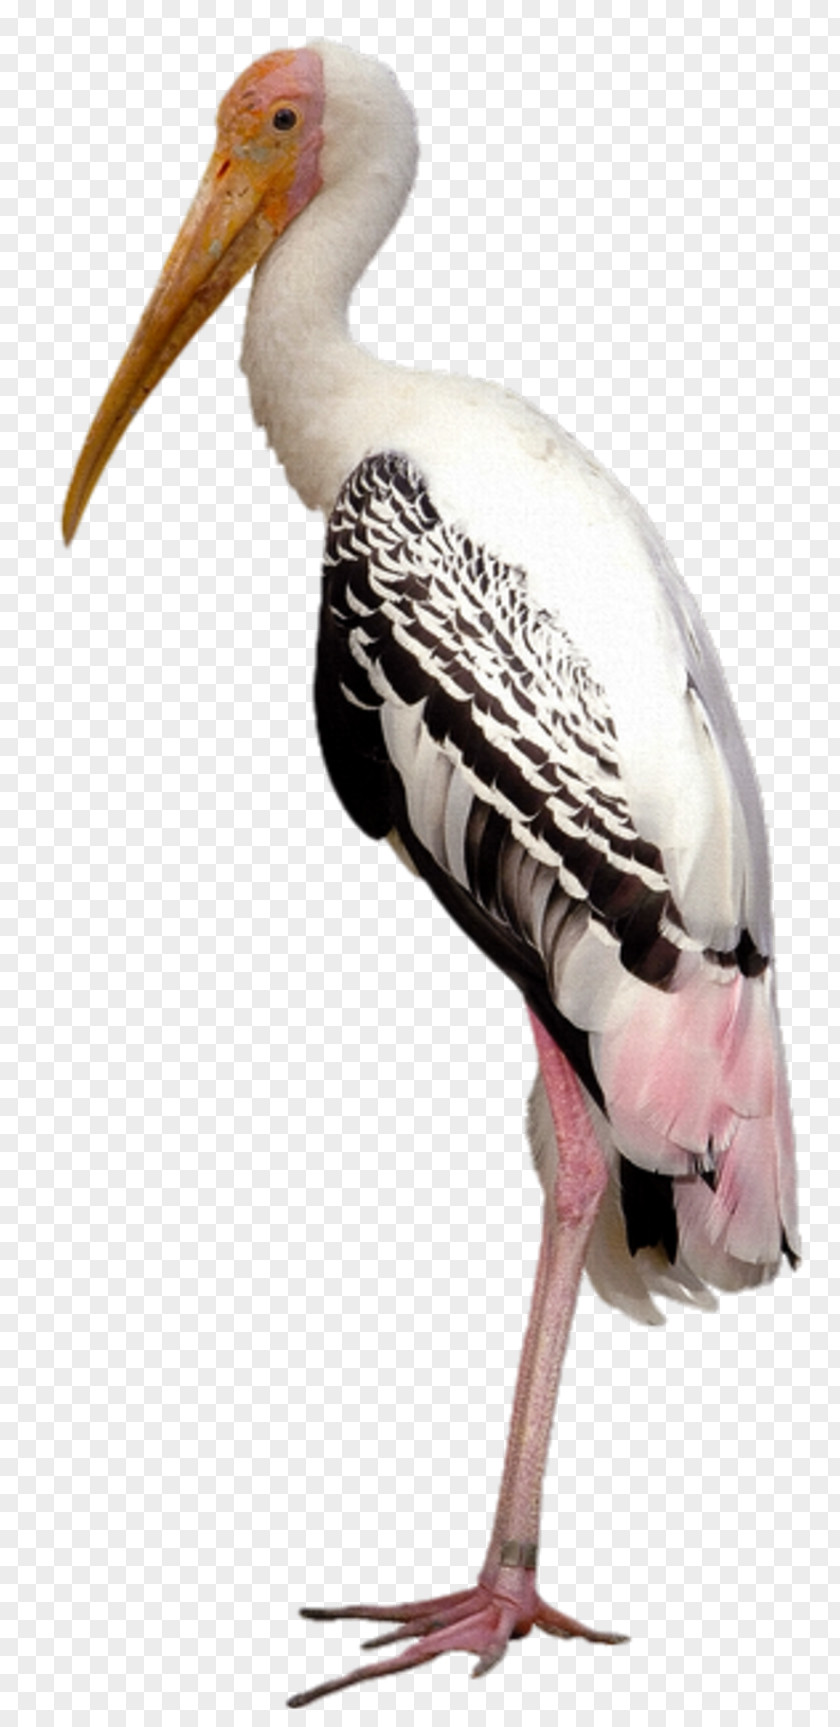 Painting Marabou Stork Painted Image Stock Photography Royalty-free PNG